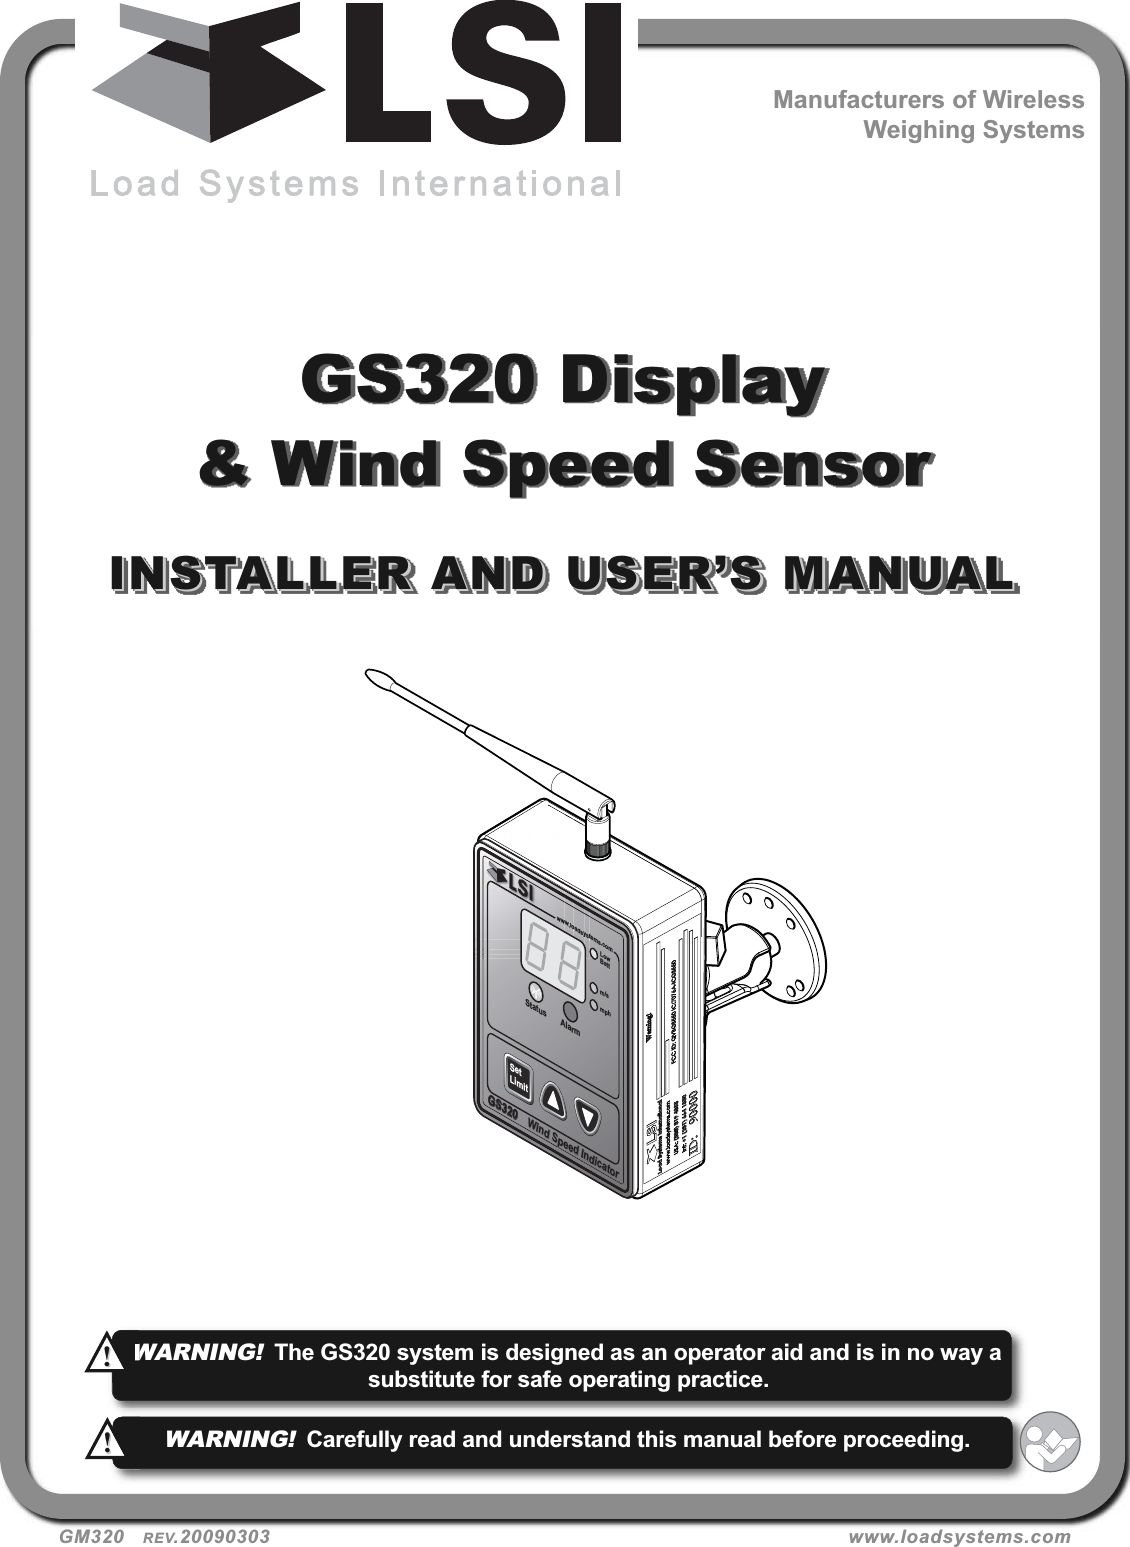 www.loadsystems.comystoadsyww.lowwGS320Wind Speed IndicatorGS320GS320Wind Speed Indicatormphm/sStatus AlarmLowBattSetLimitGS320 Display&amp; Wind Speed SensorINSTALLER AND USER’S MANUALINSTALLER AND USER’S MANUALGM320   REV.20090303 www.loadsystems.comManufacturers of WirelessWeighing SystemsWARNING!The GS320 system is designed as an operator aid and is in no way asubstitute for safe operating practice.!!WARNING!Carefully read and understand this manual before proceeding.!!